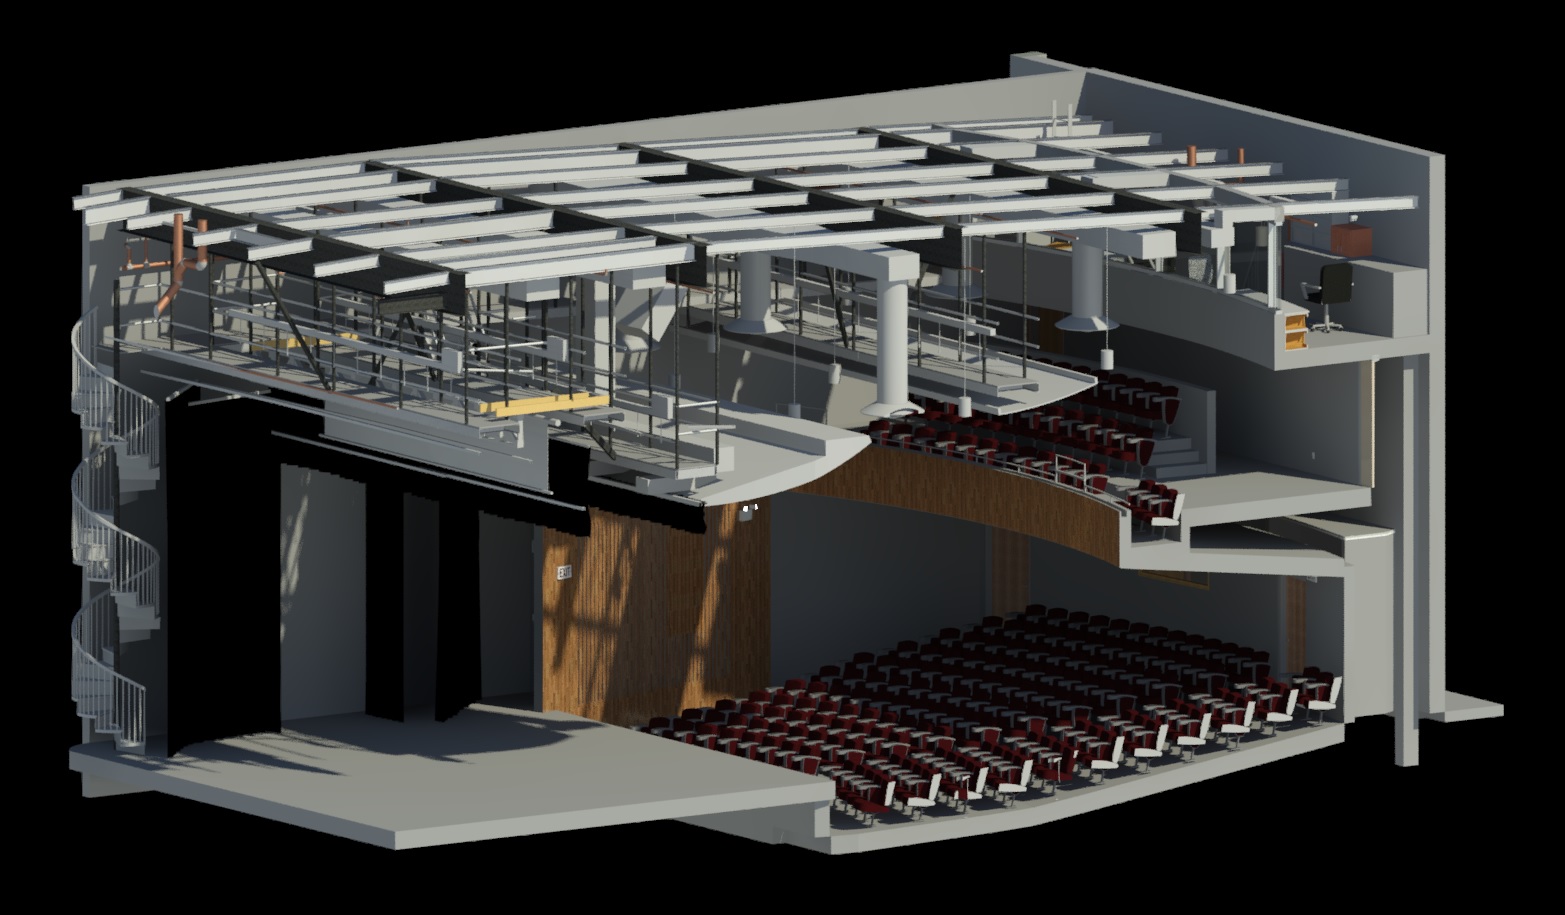 The Revit model of the Powerhouse Theatre in the Roger T. Sherman Center.